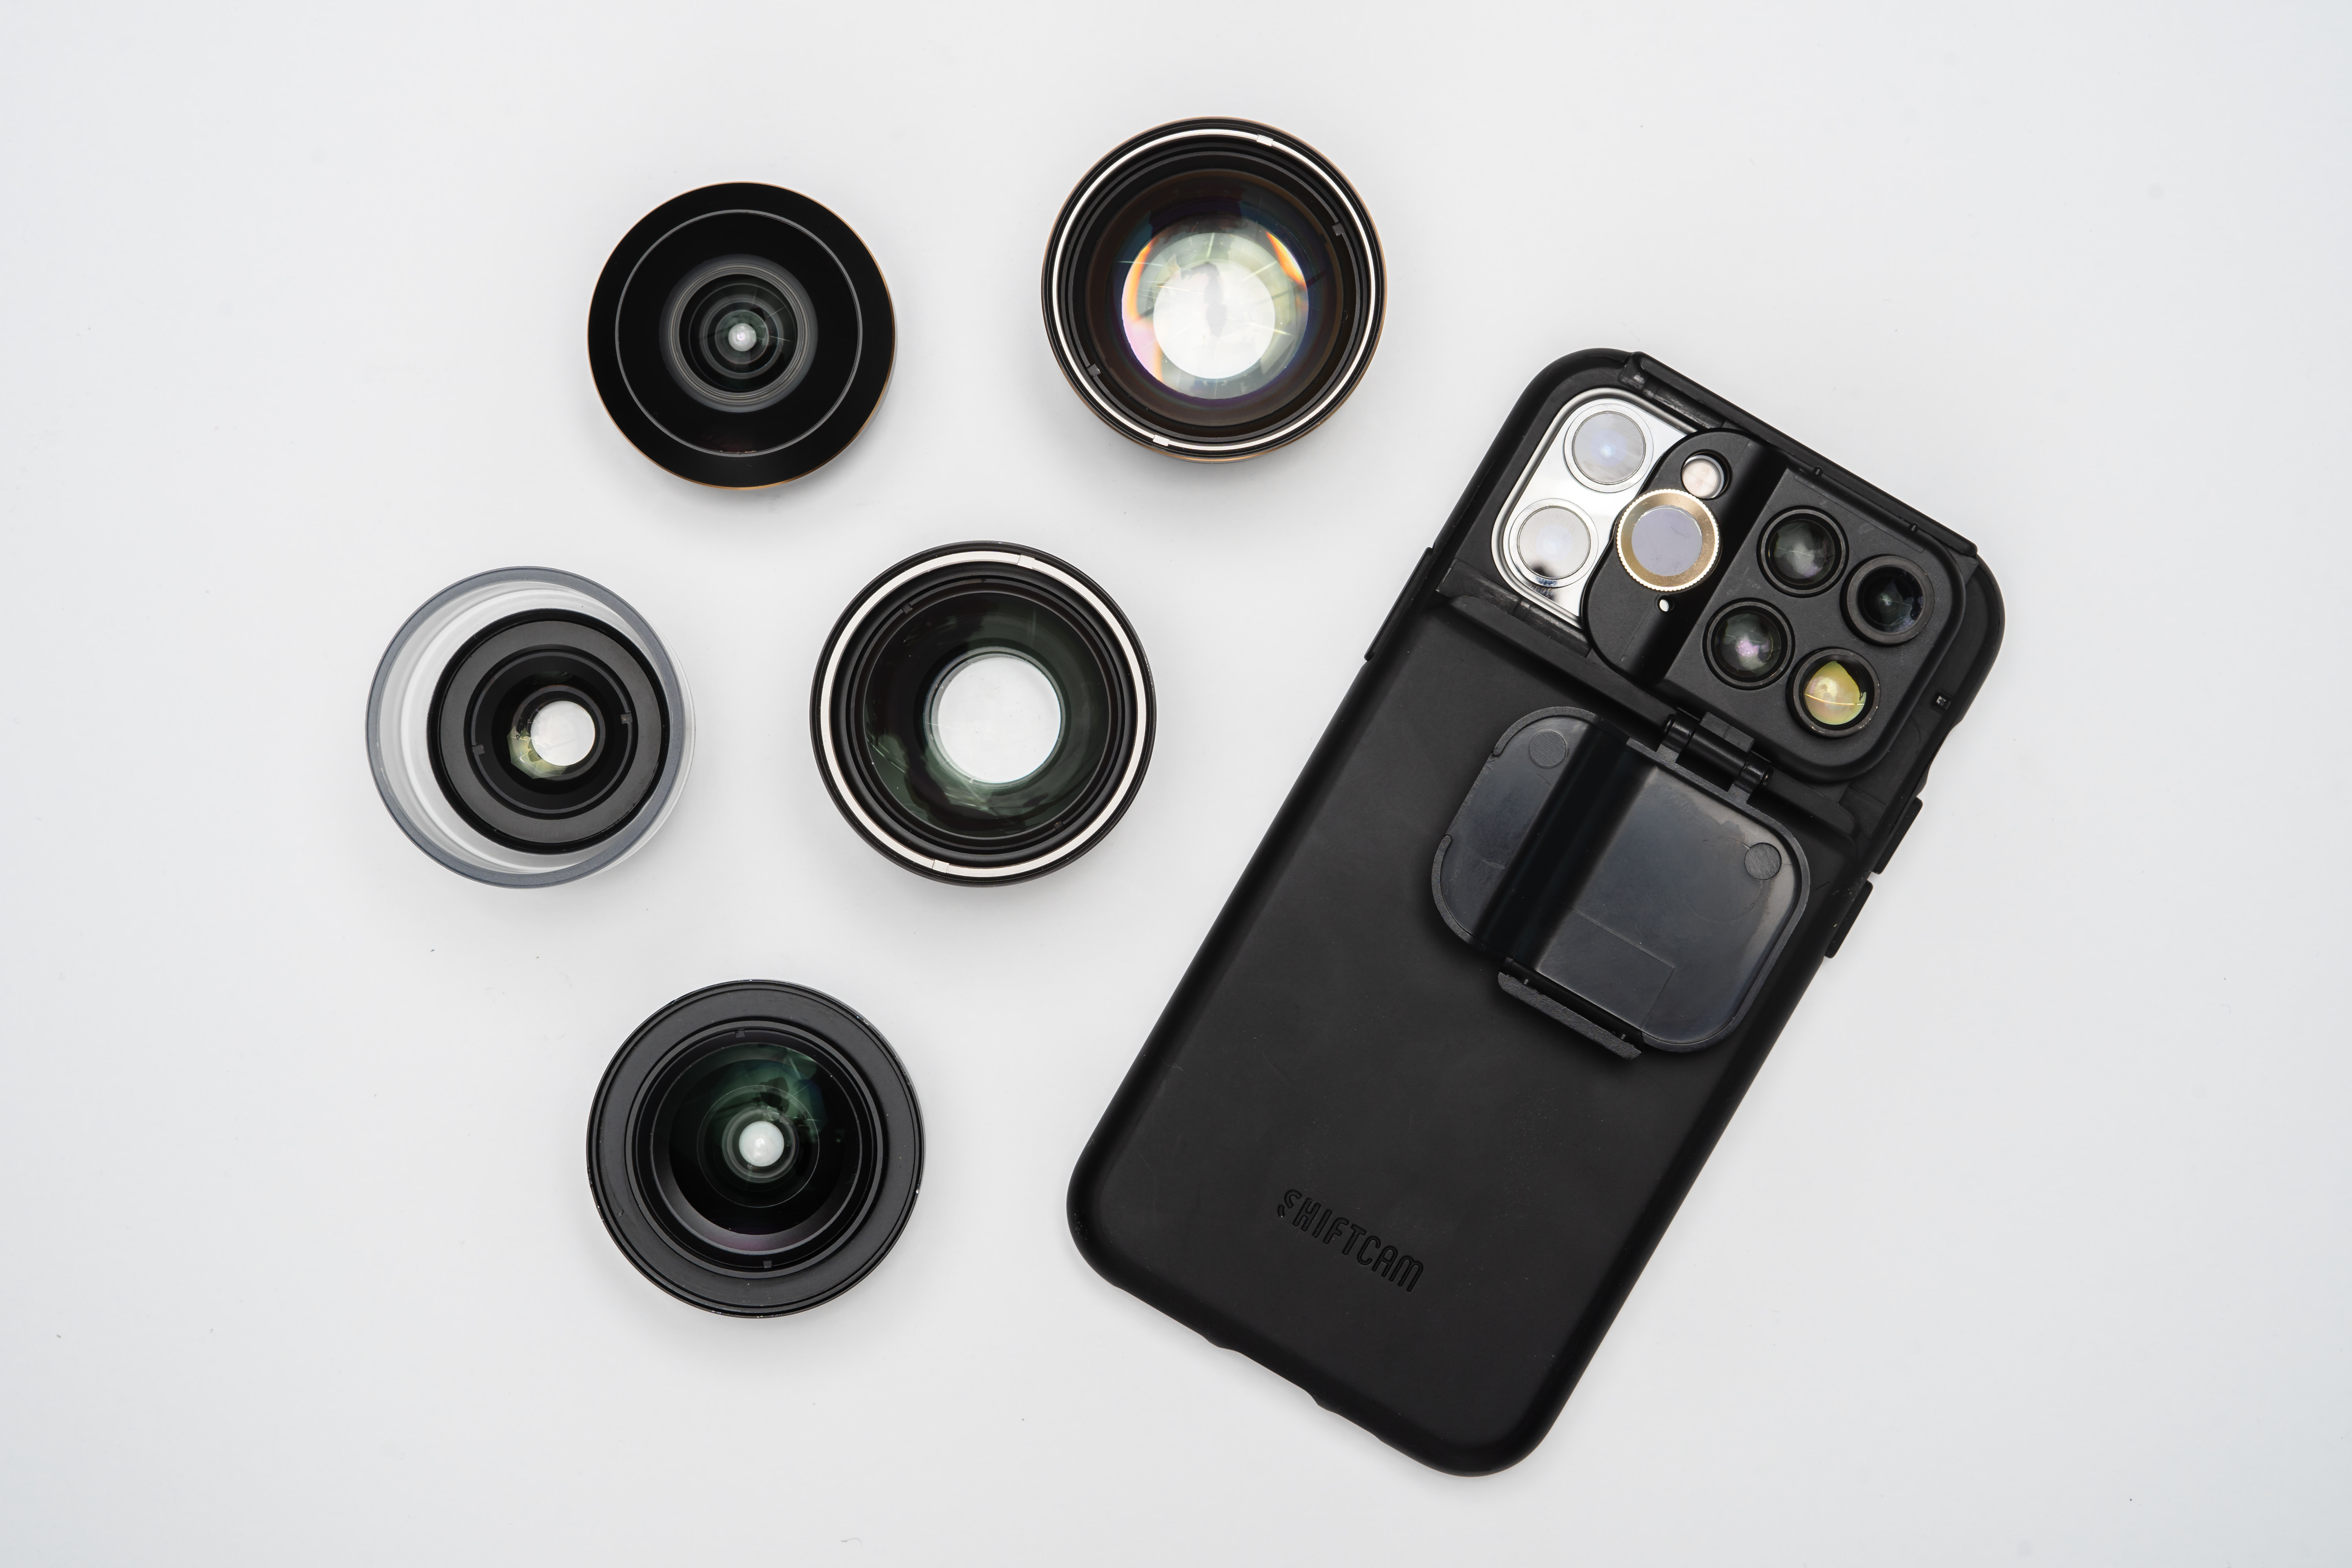 ShiftCam cases give iPhone 11 models up to four extra lenses- 9to5Mac